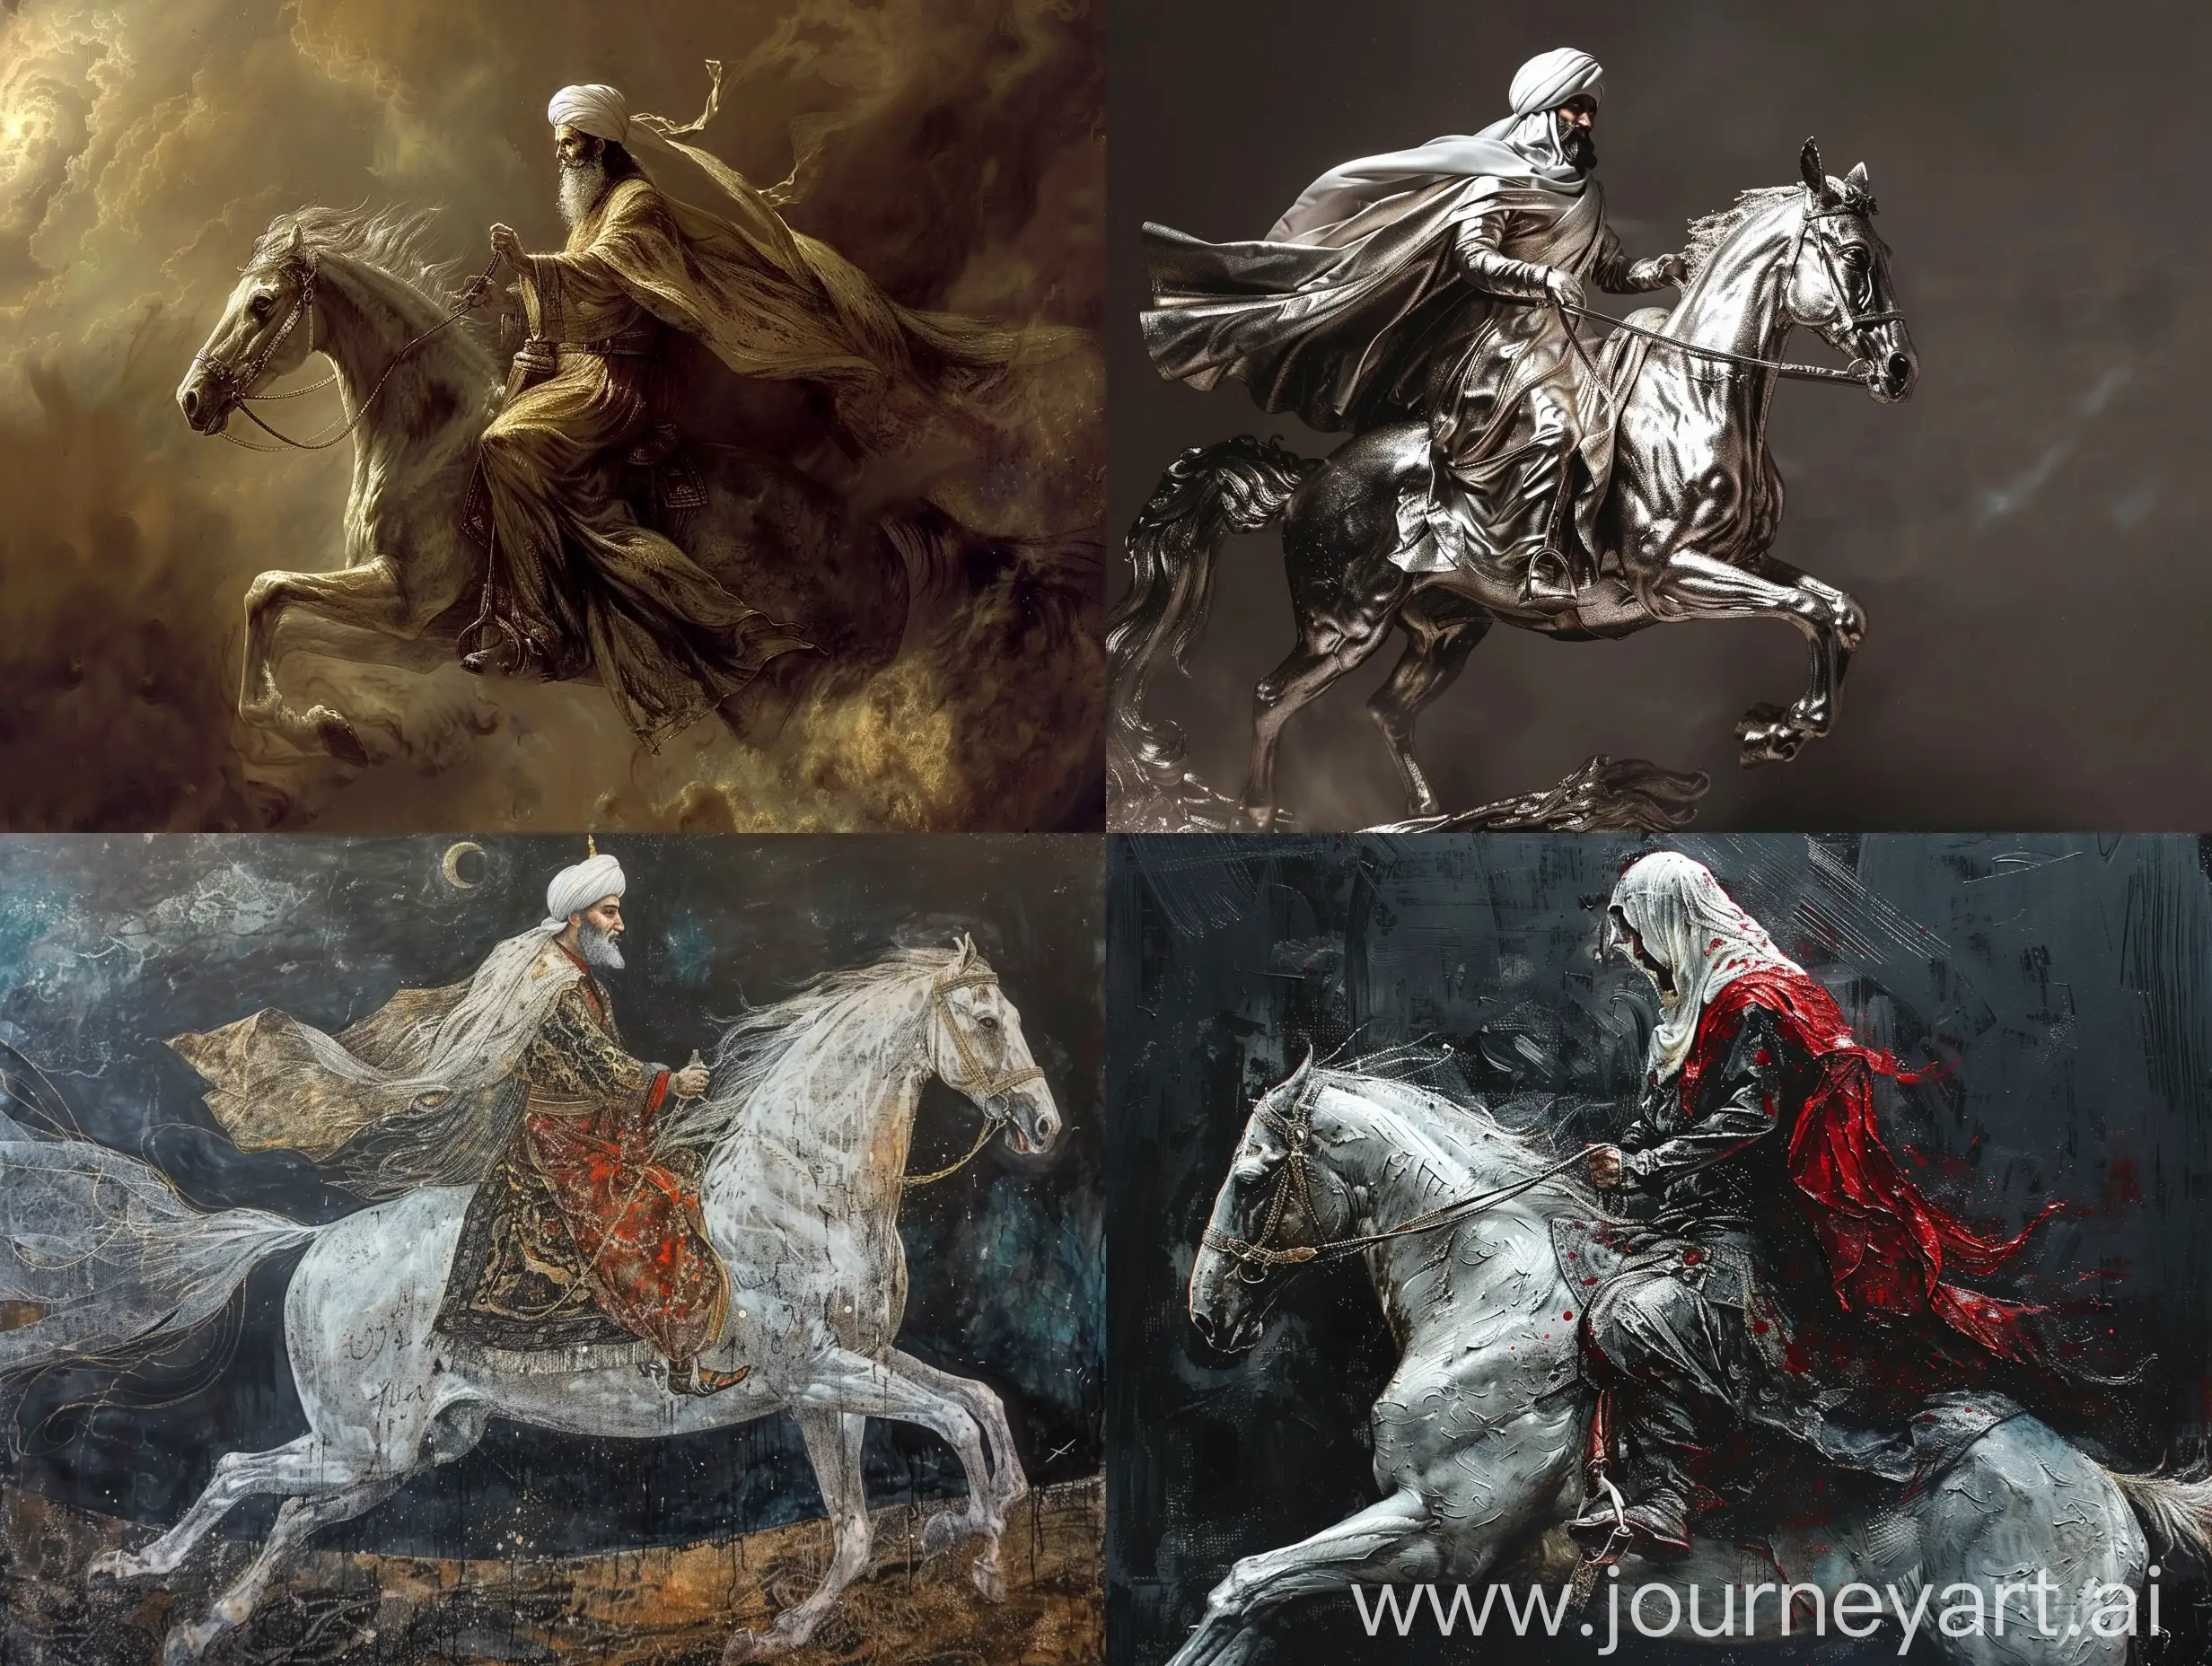 Imam-Husayn-Riding-on-a-Silver-Horse-in-a-43-Aspect-Ratio